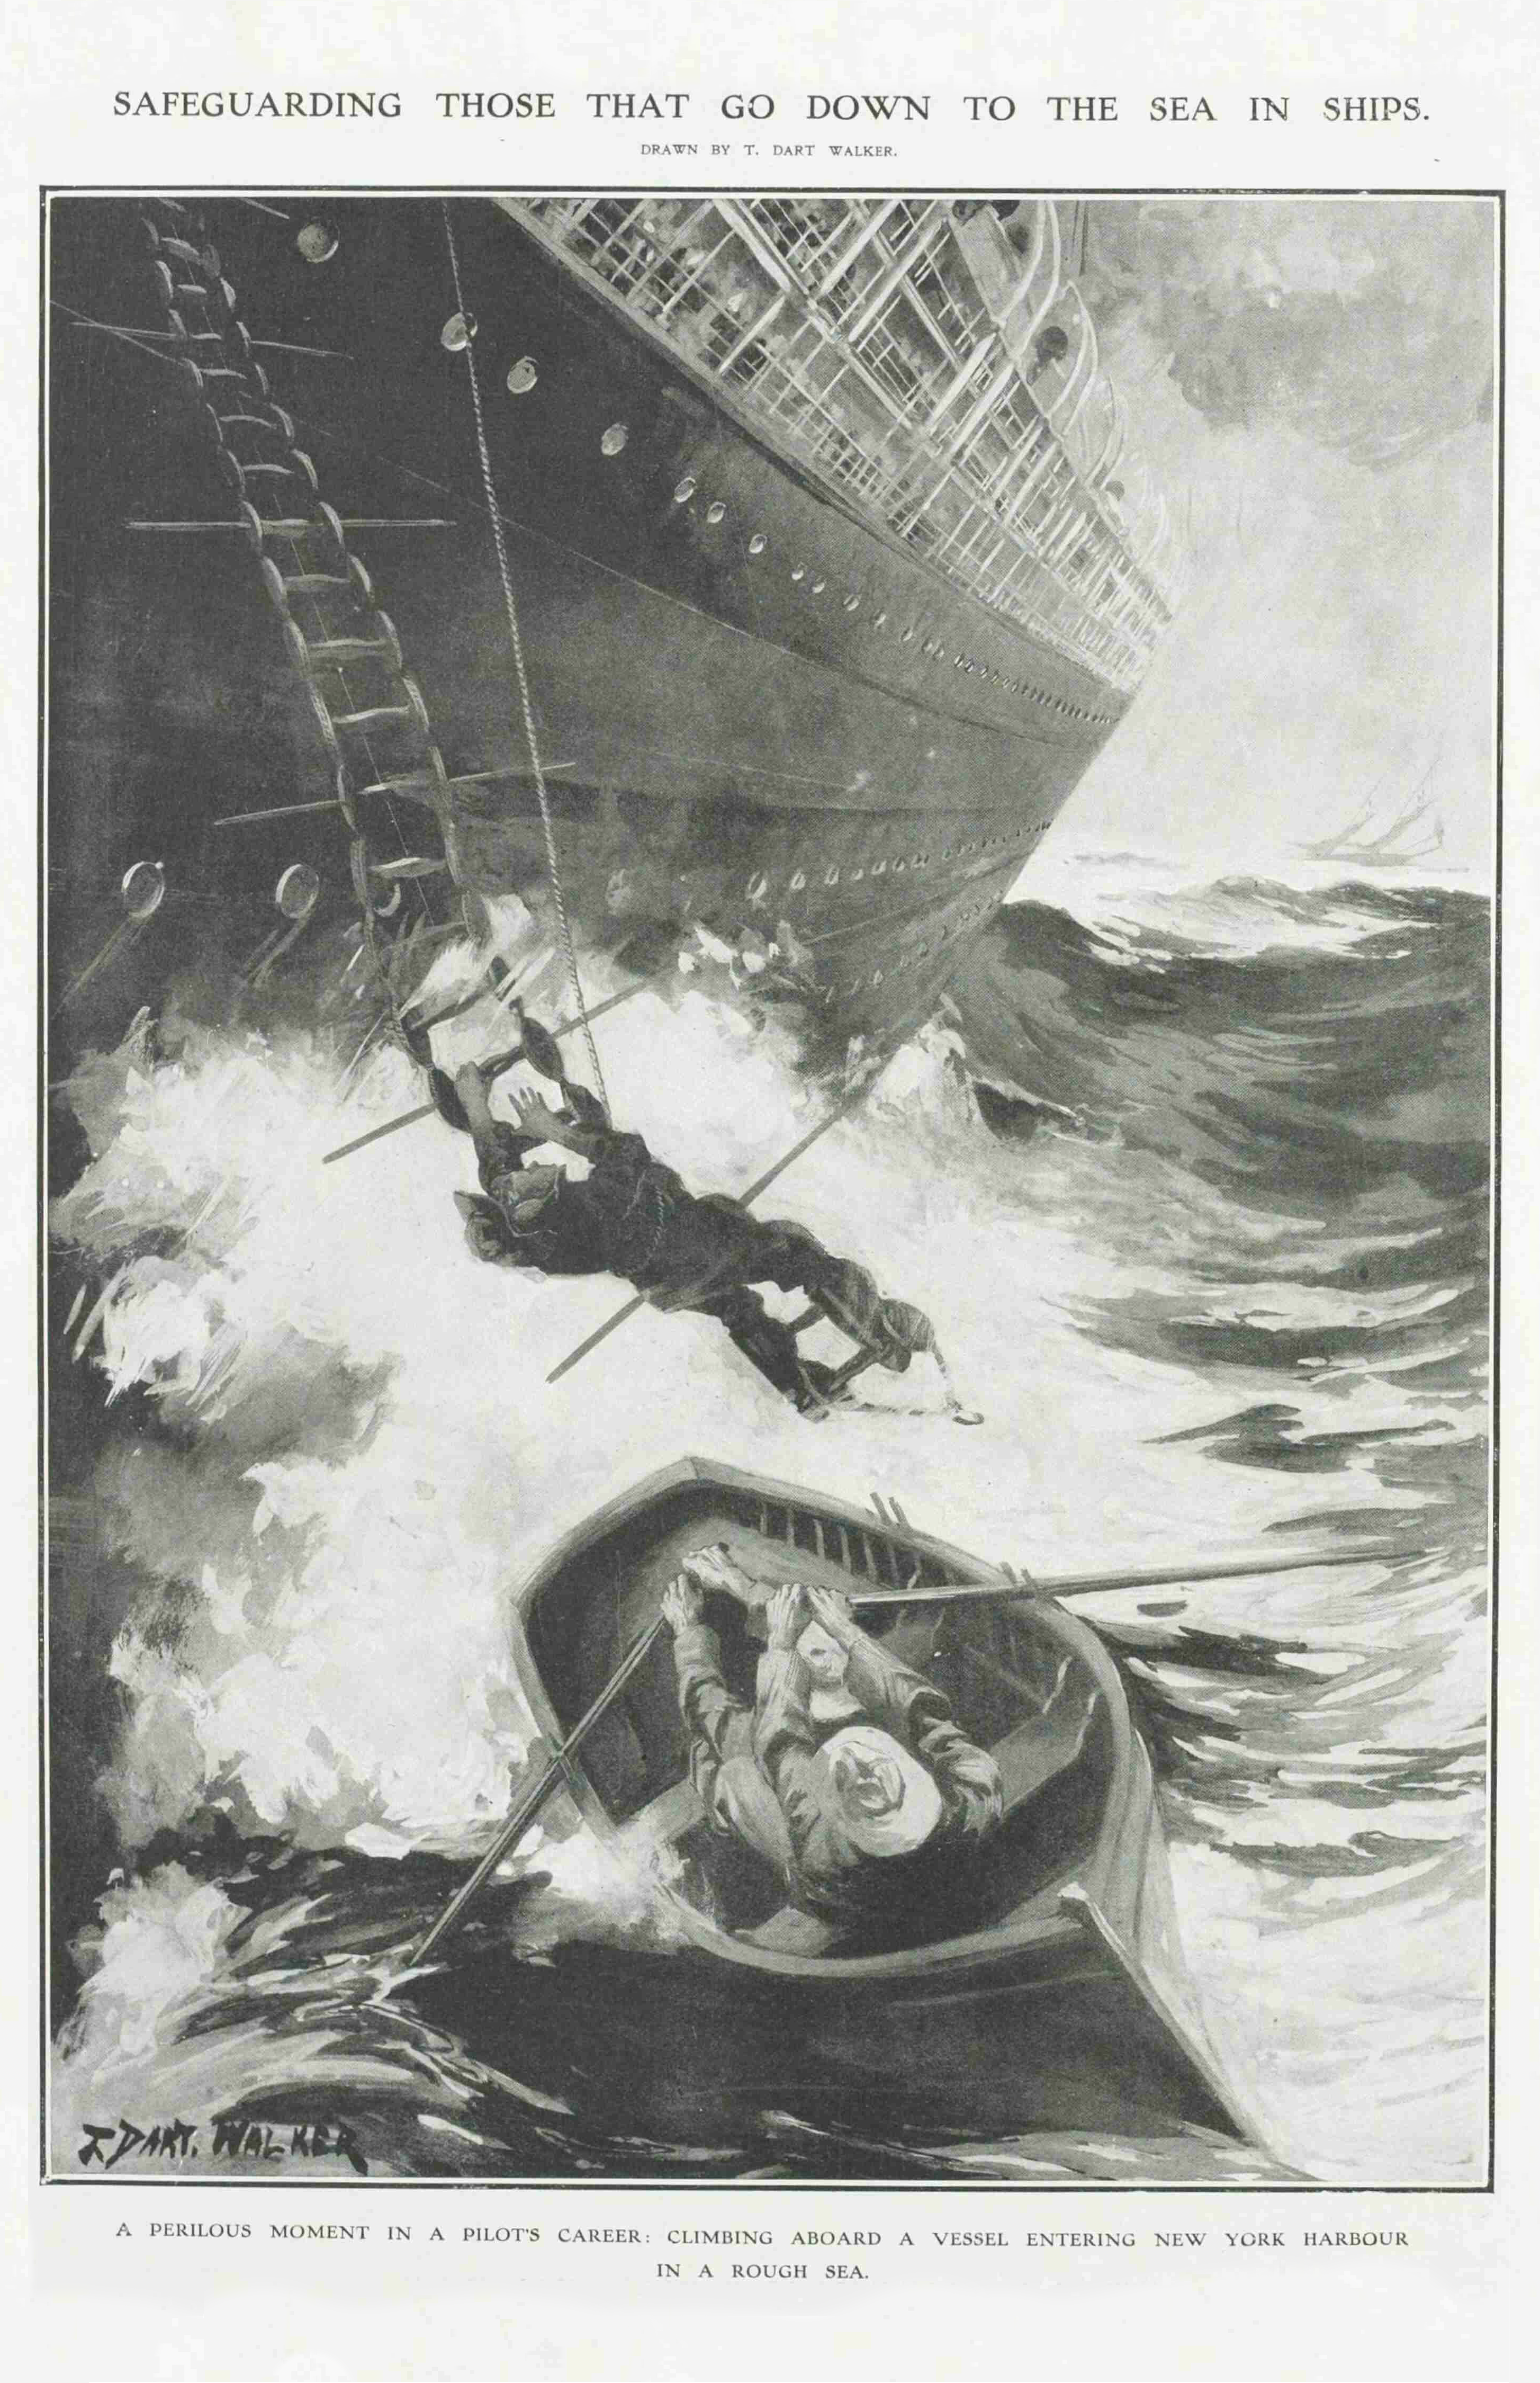 A perilous moment in a Pilot’s career: climbing aboard a vessel entering New York Harbor in rough seas, by T. Dart Walker 1905. Printed, The London Illustrated News, July 21, 1906.